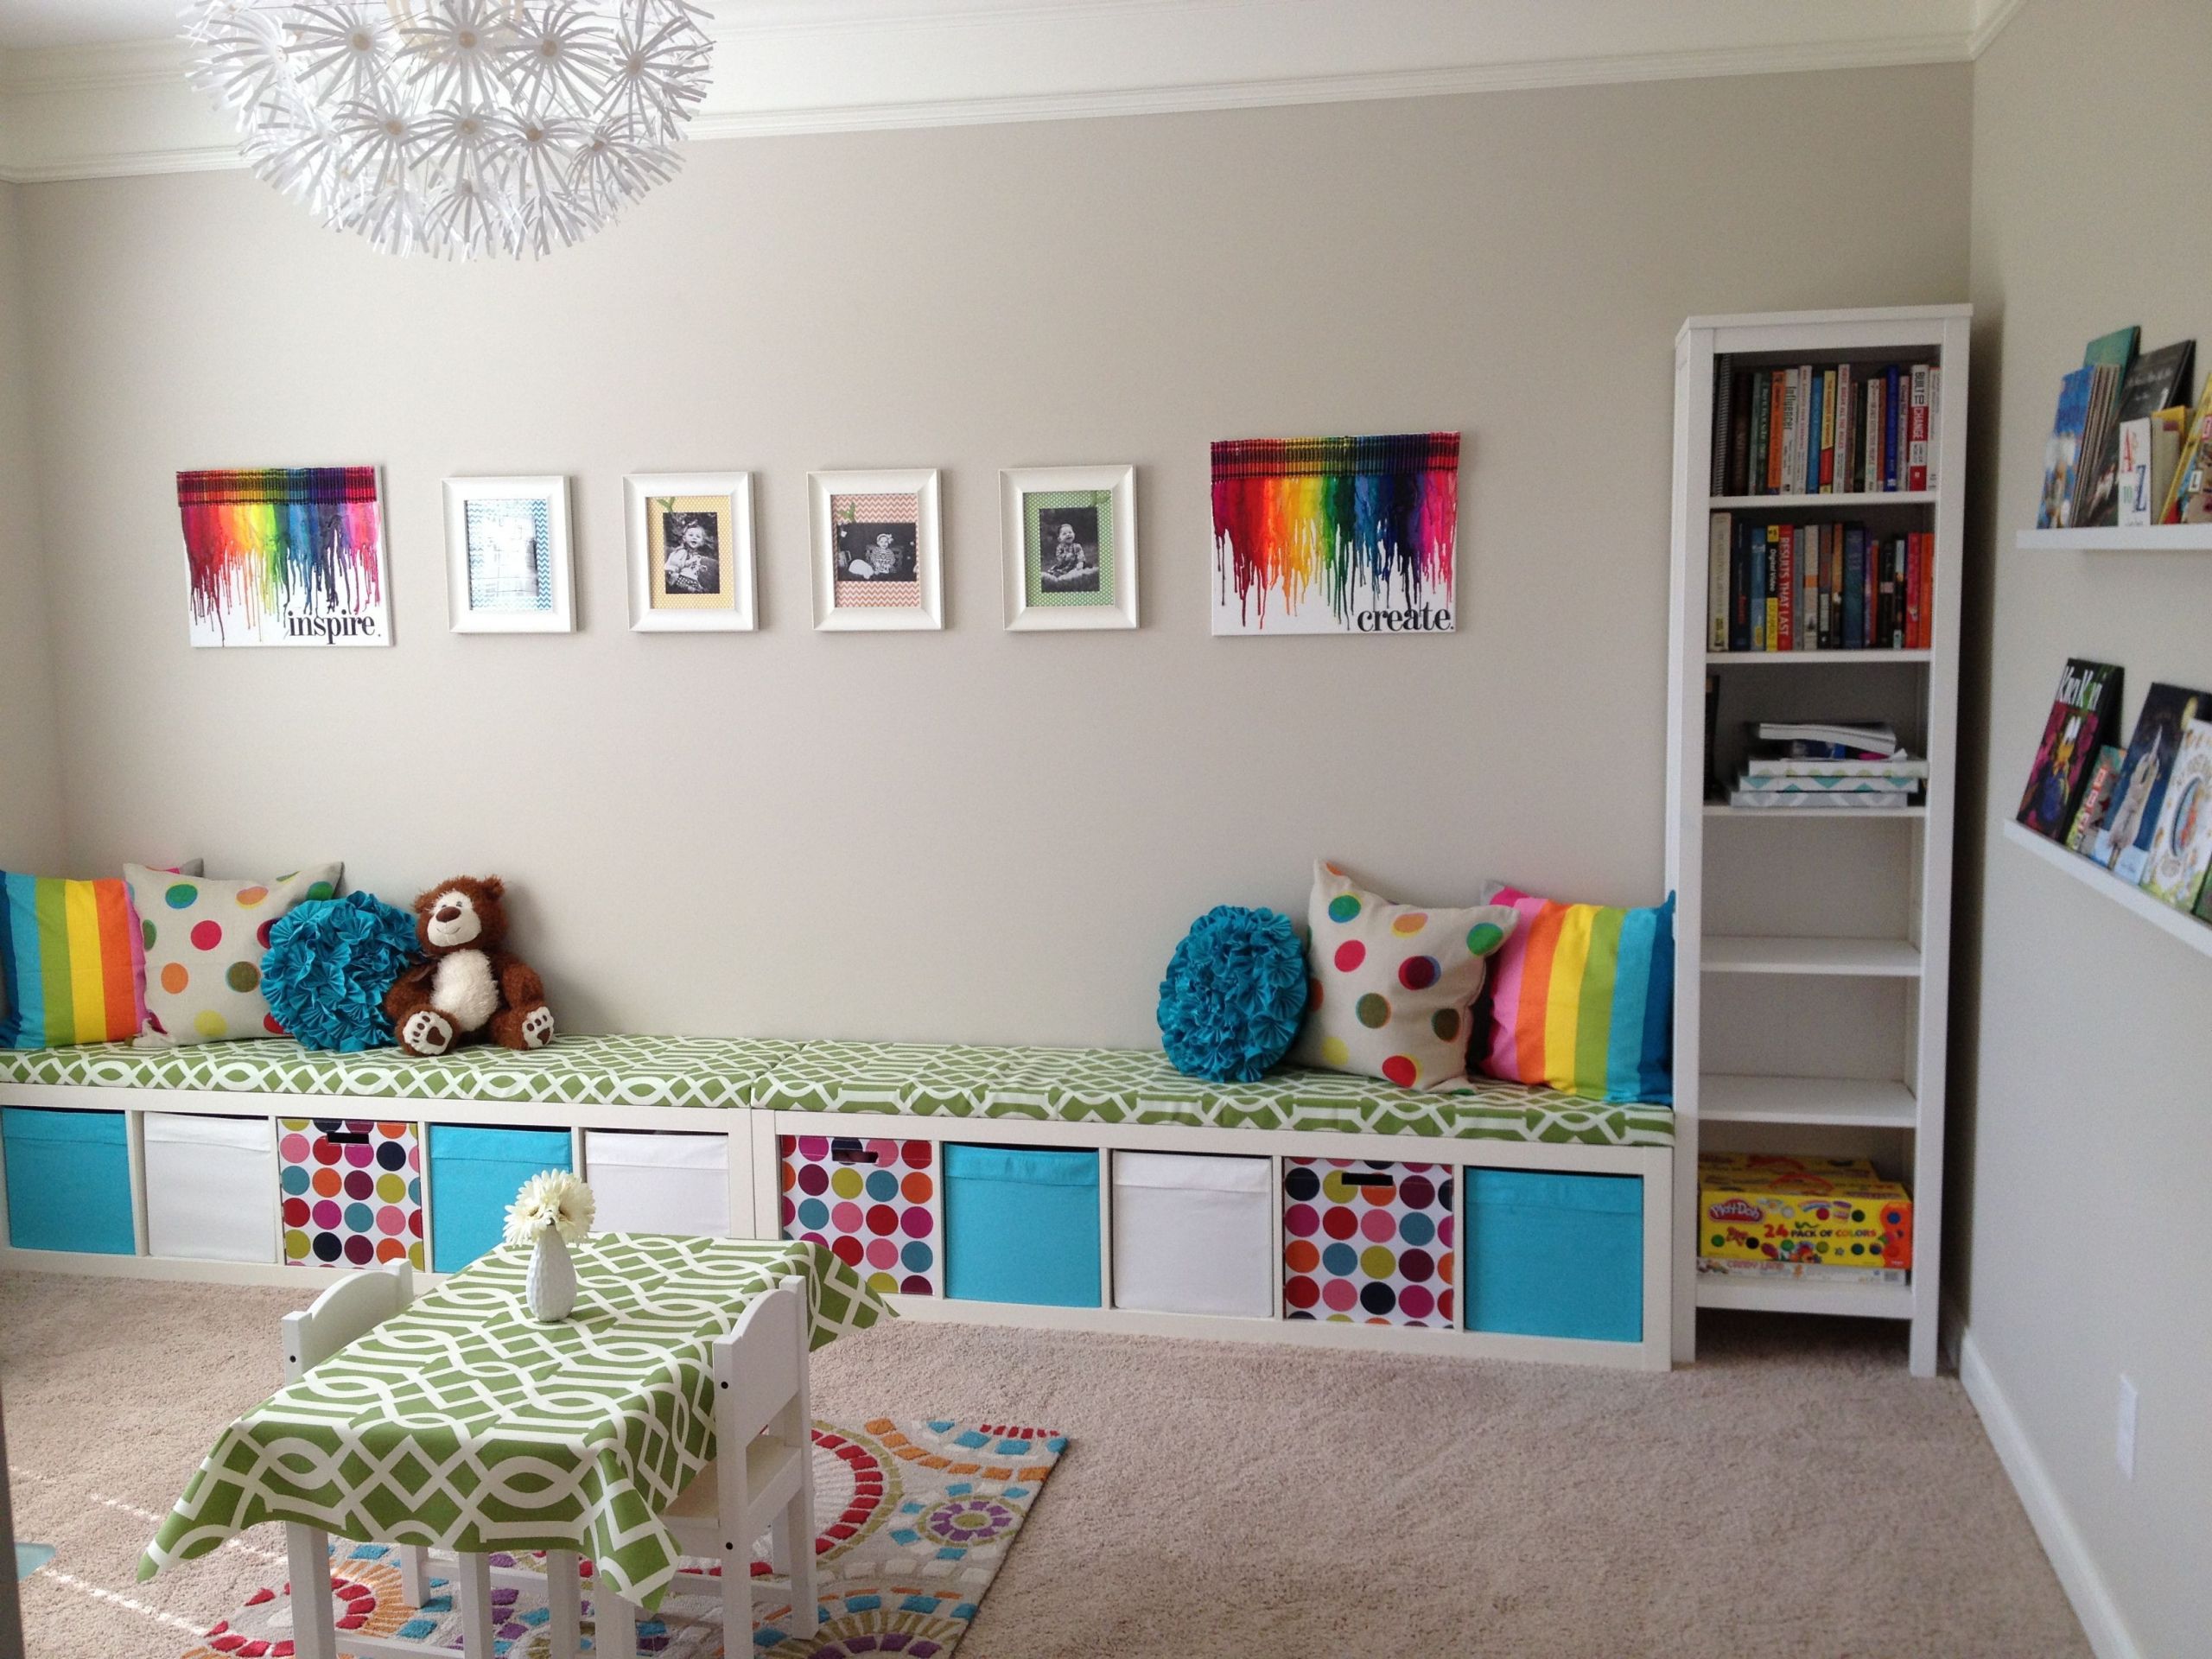 Ideas For Kids Playrooms
 5 Smart and Creative Playroom Ideas on a Bud for the